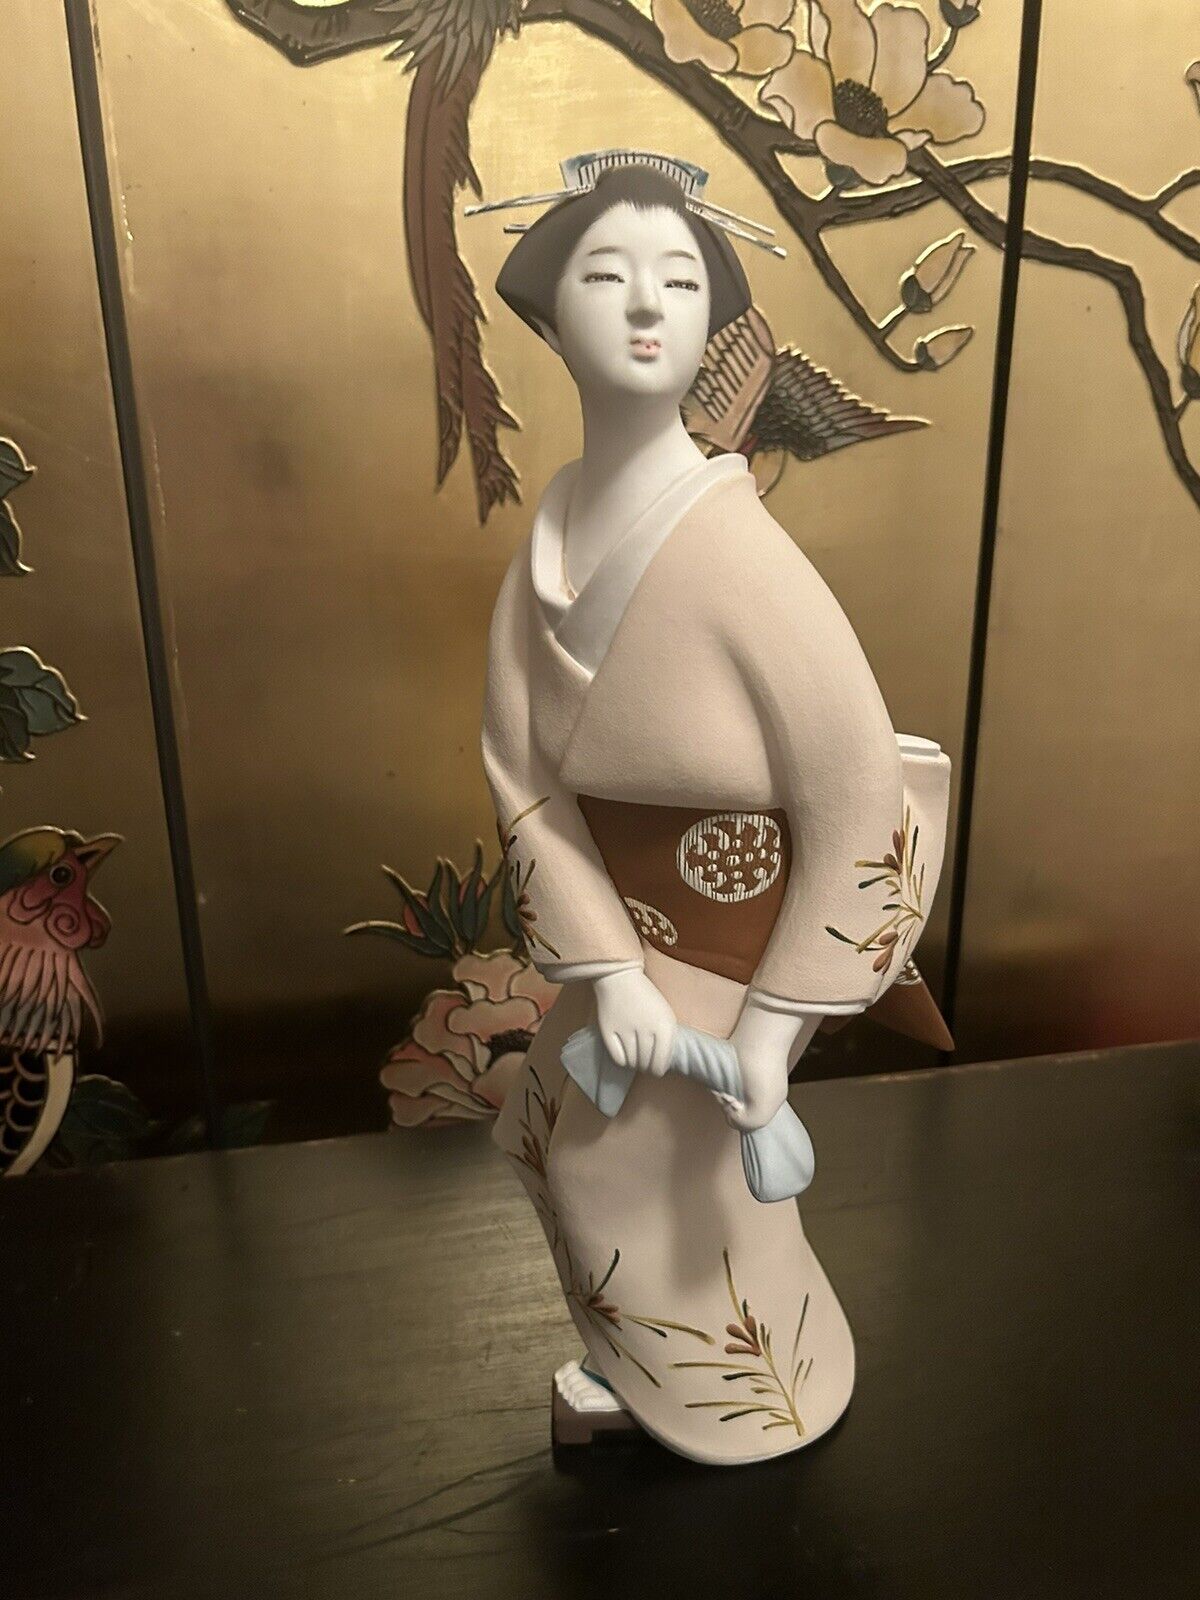 Beautiful Asian Geisha Figurine 16” by 6”Hand Painted and Signed